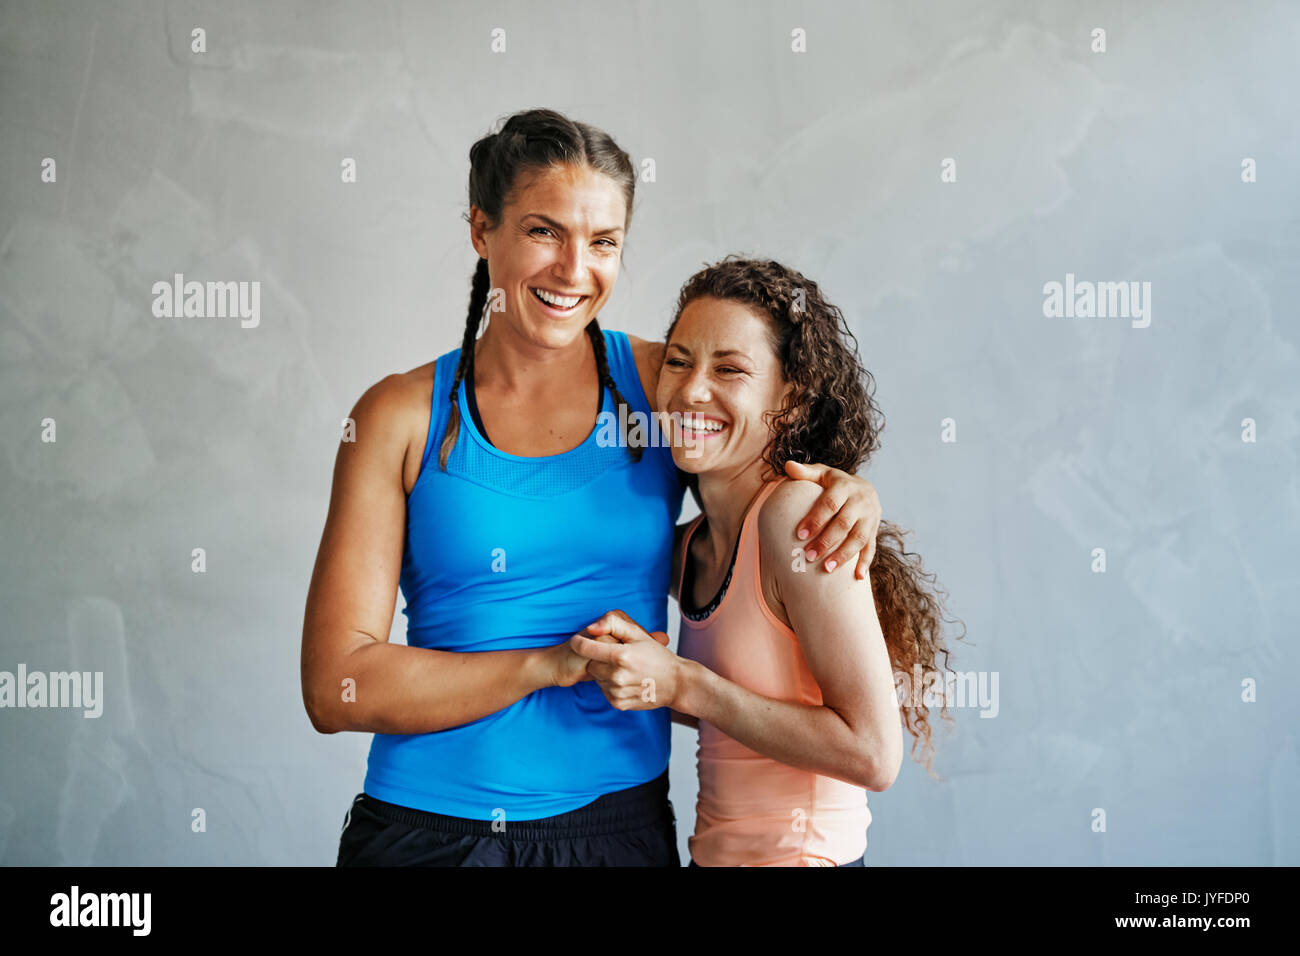 Two smiling young female friends in sportswear high fiving each other while doing pushups together on the floor of a gym Stock Photo